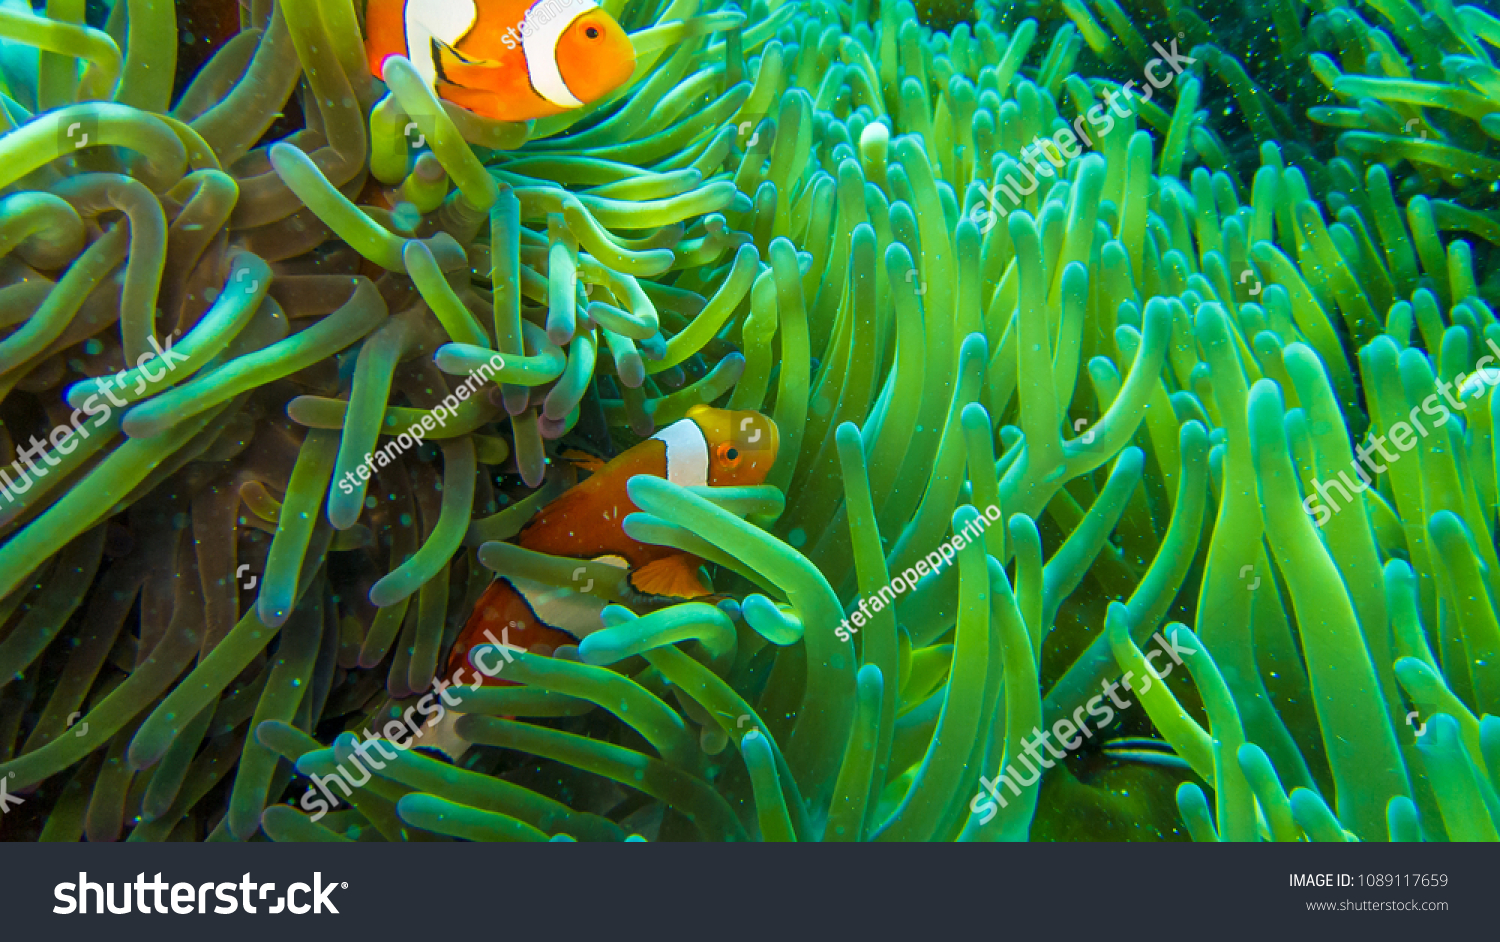 clown fish in anemone, colorful in green and orange #1089117659